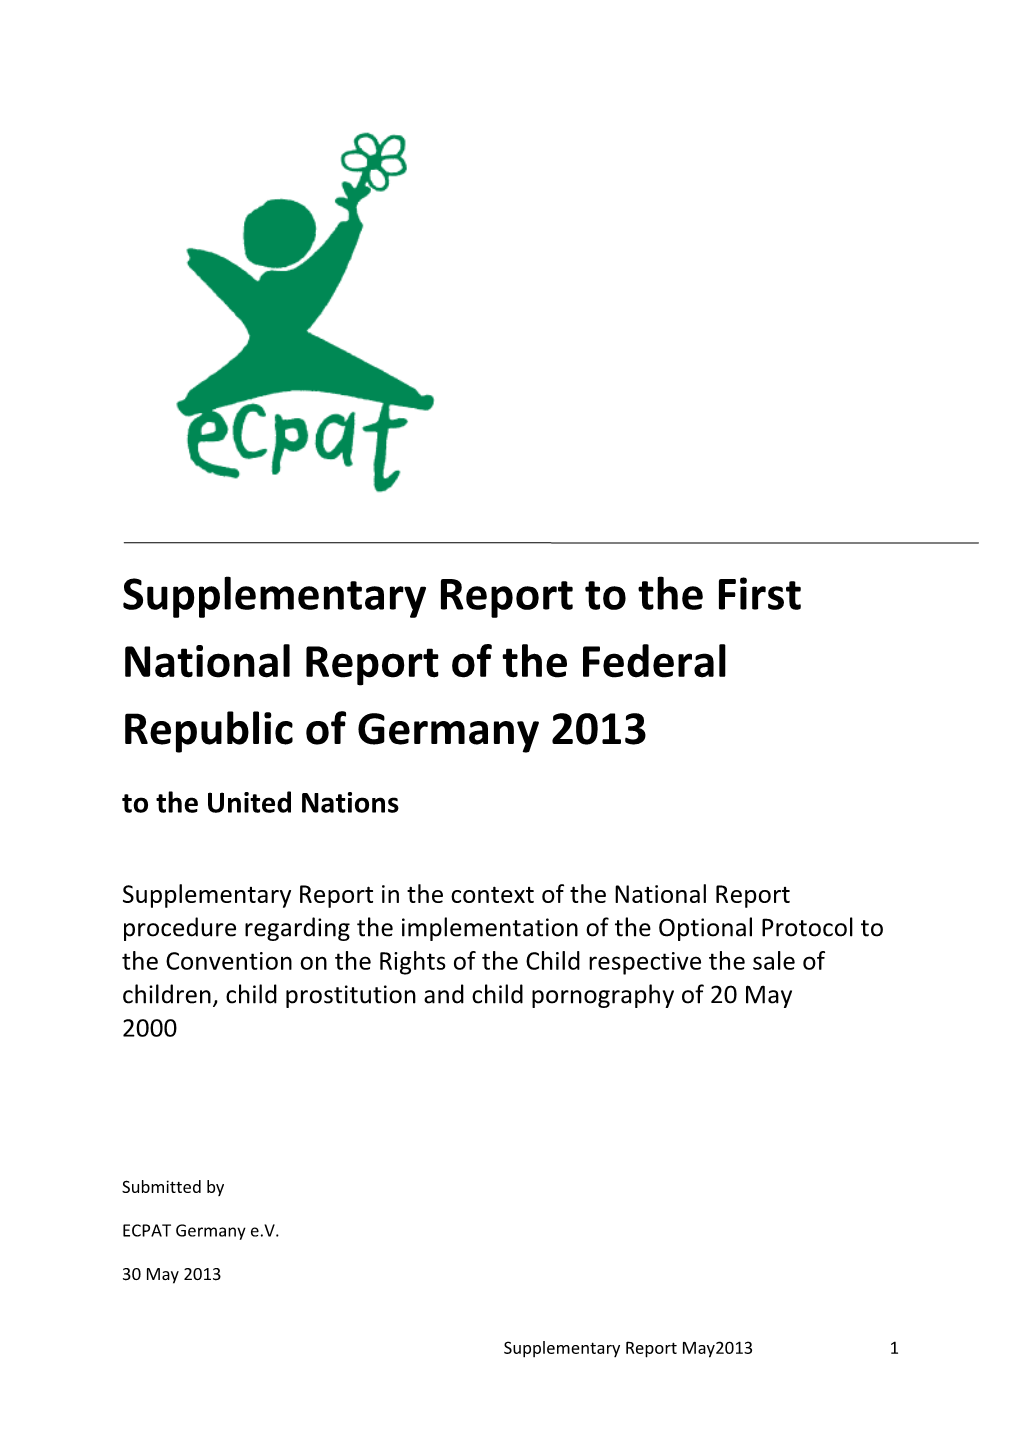 Supplementary Report to the First National Report of the Federal Republic of Germany 2013 to the United Nations